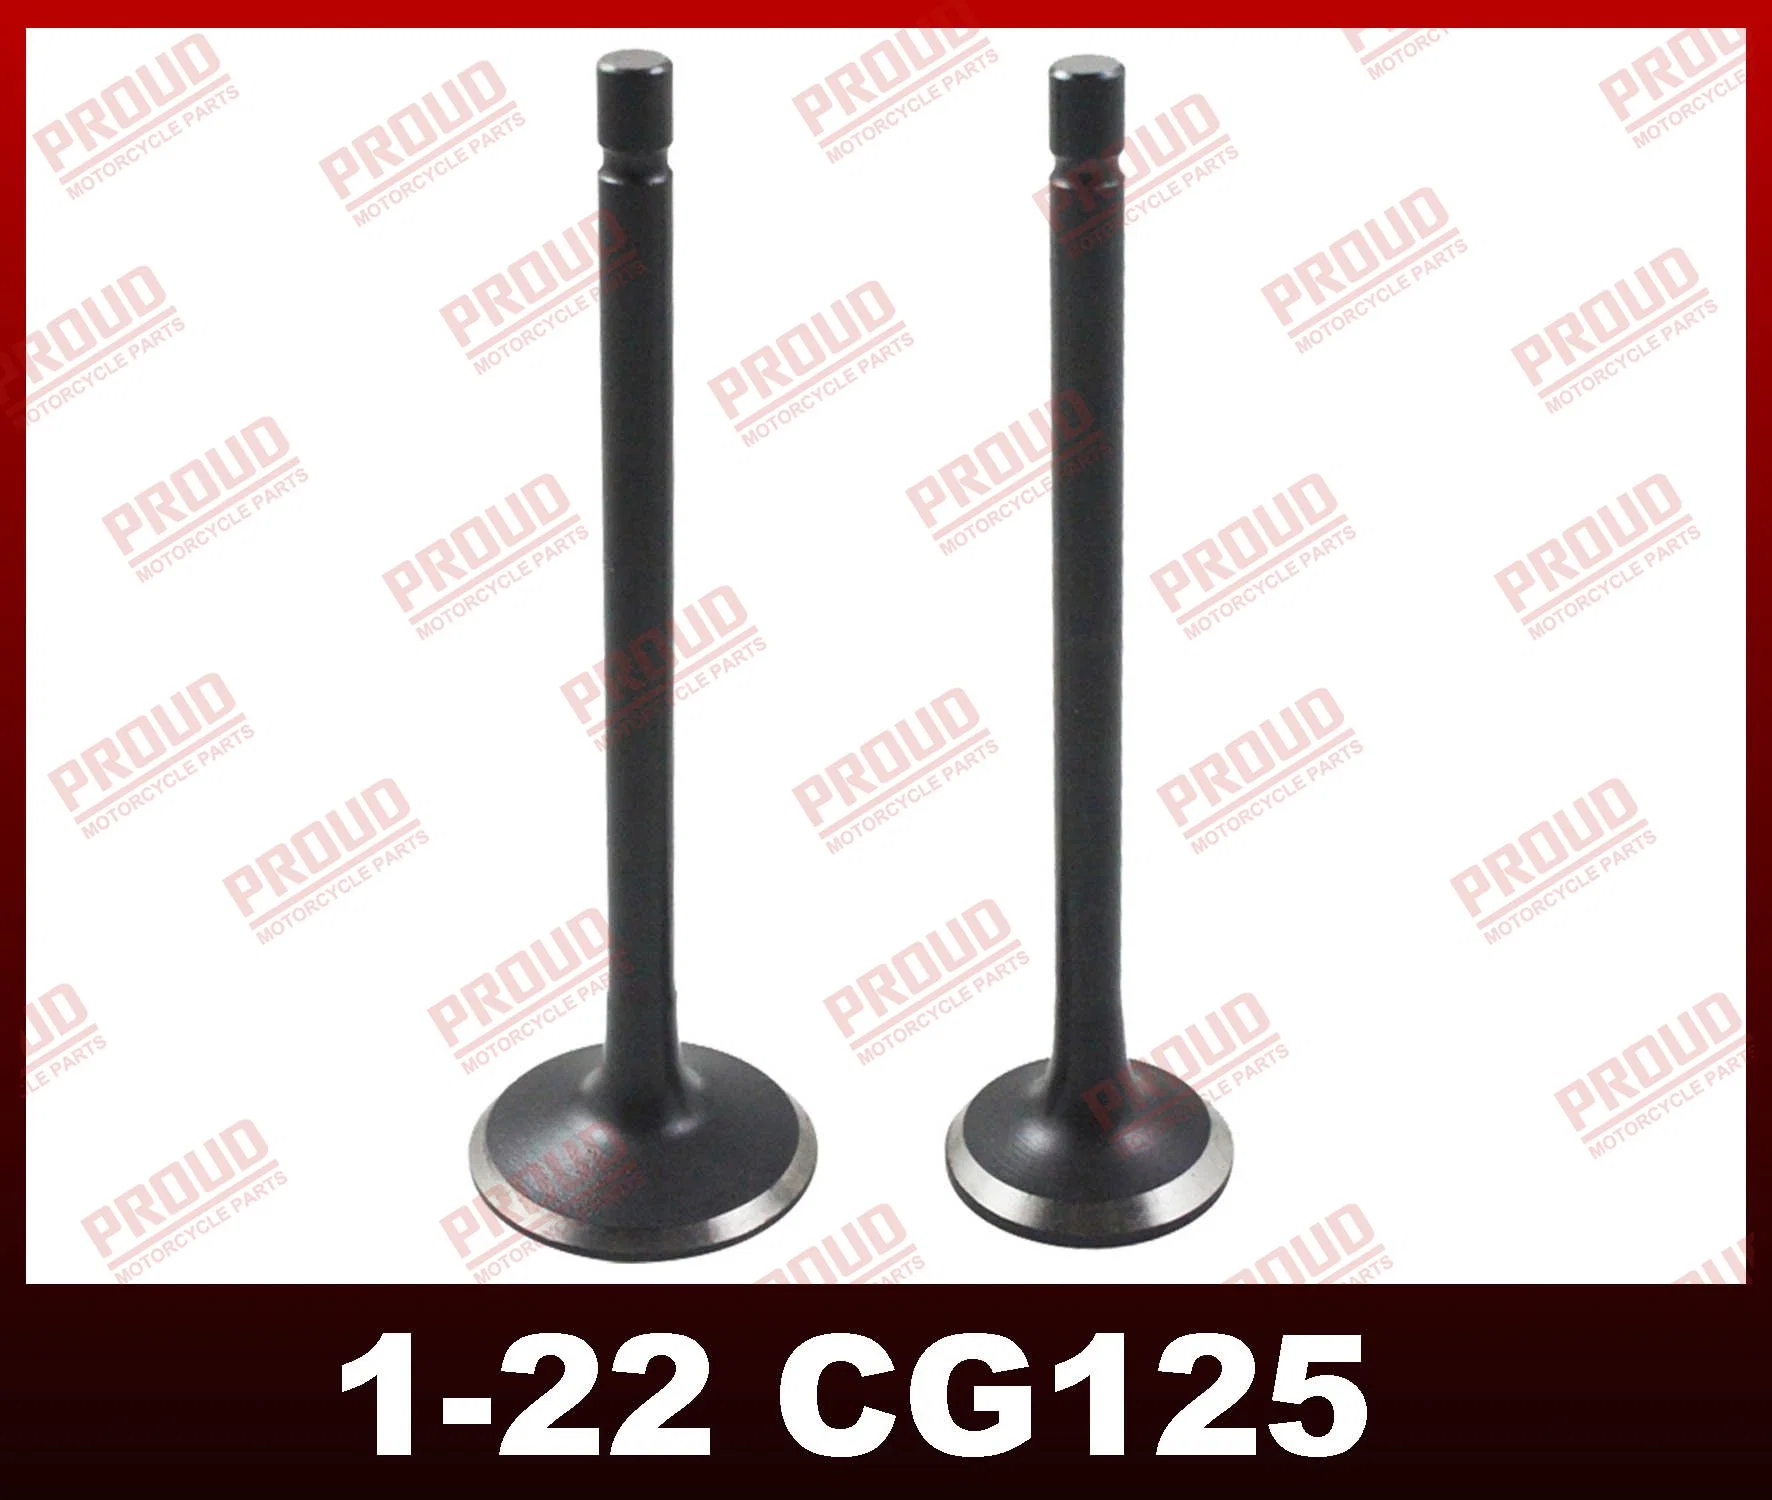 Motorcycle Engine Valve High quality/High cost performance Cg125/150/200 Motorcycle Parts